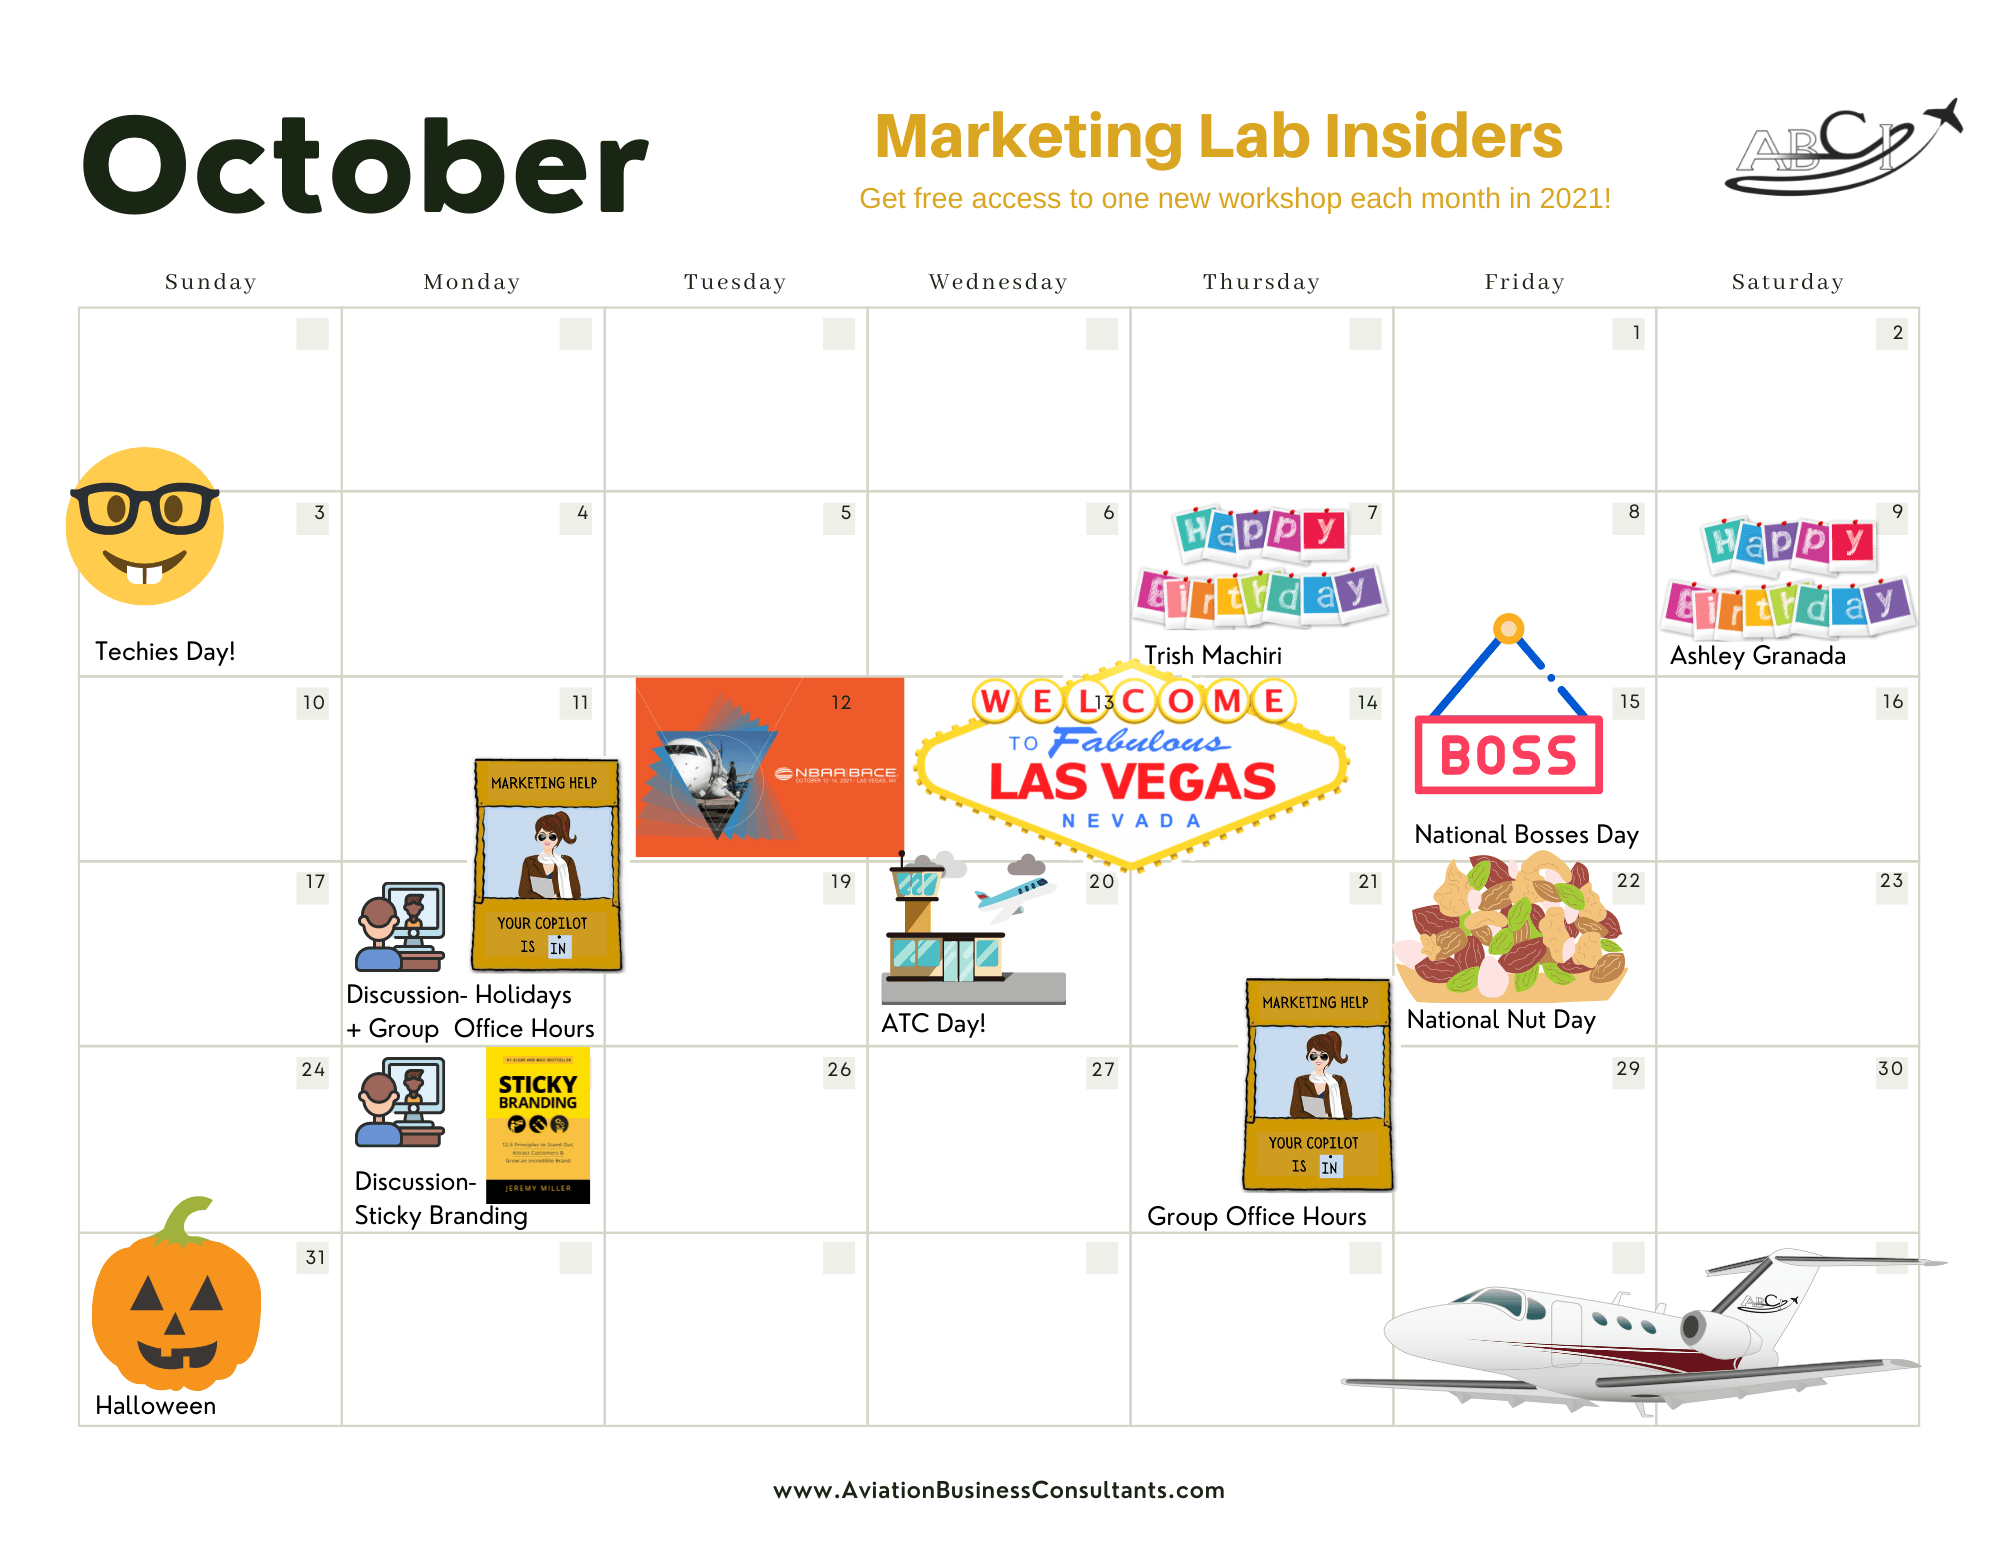 Aviation Marketing Events for October 2021